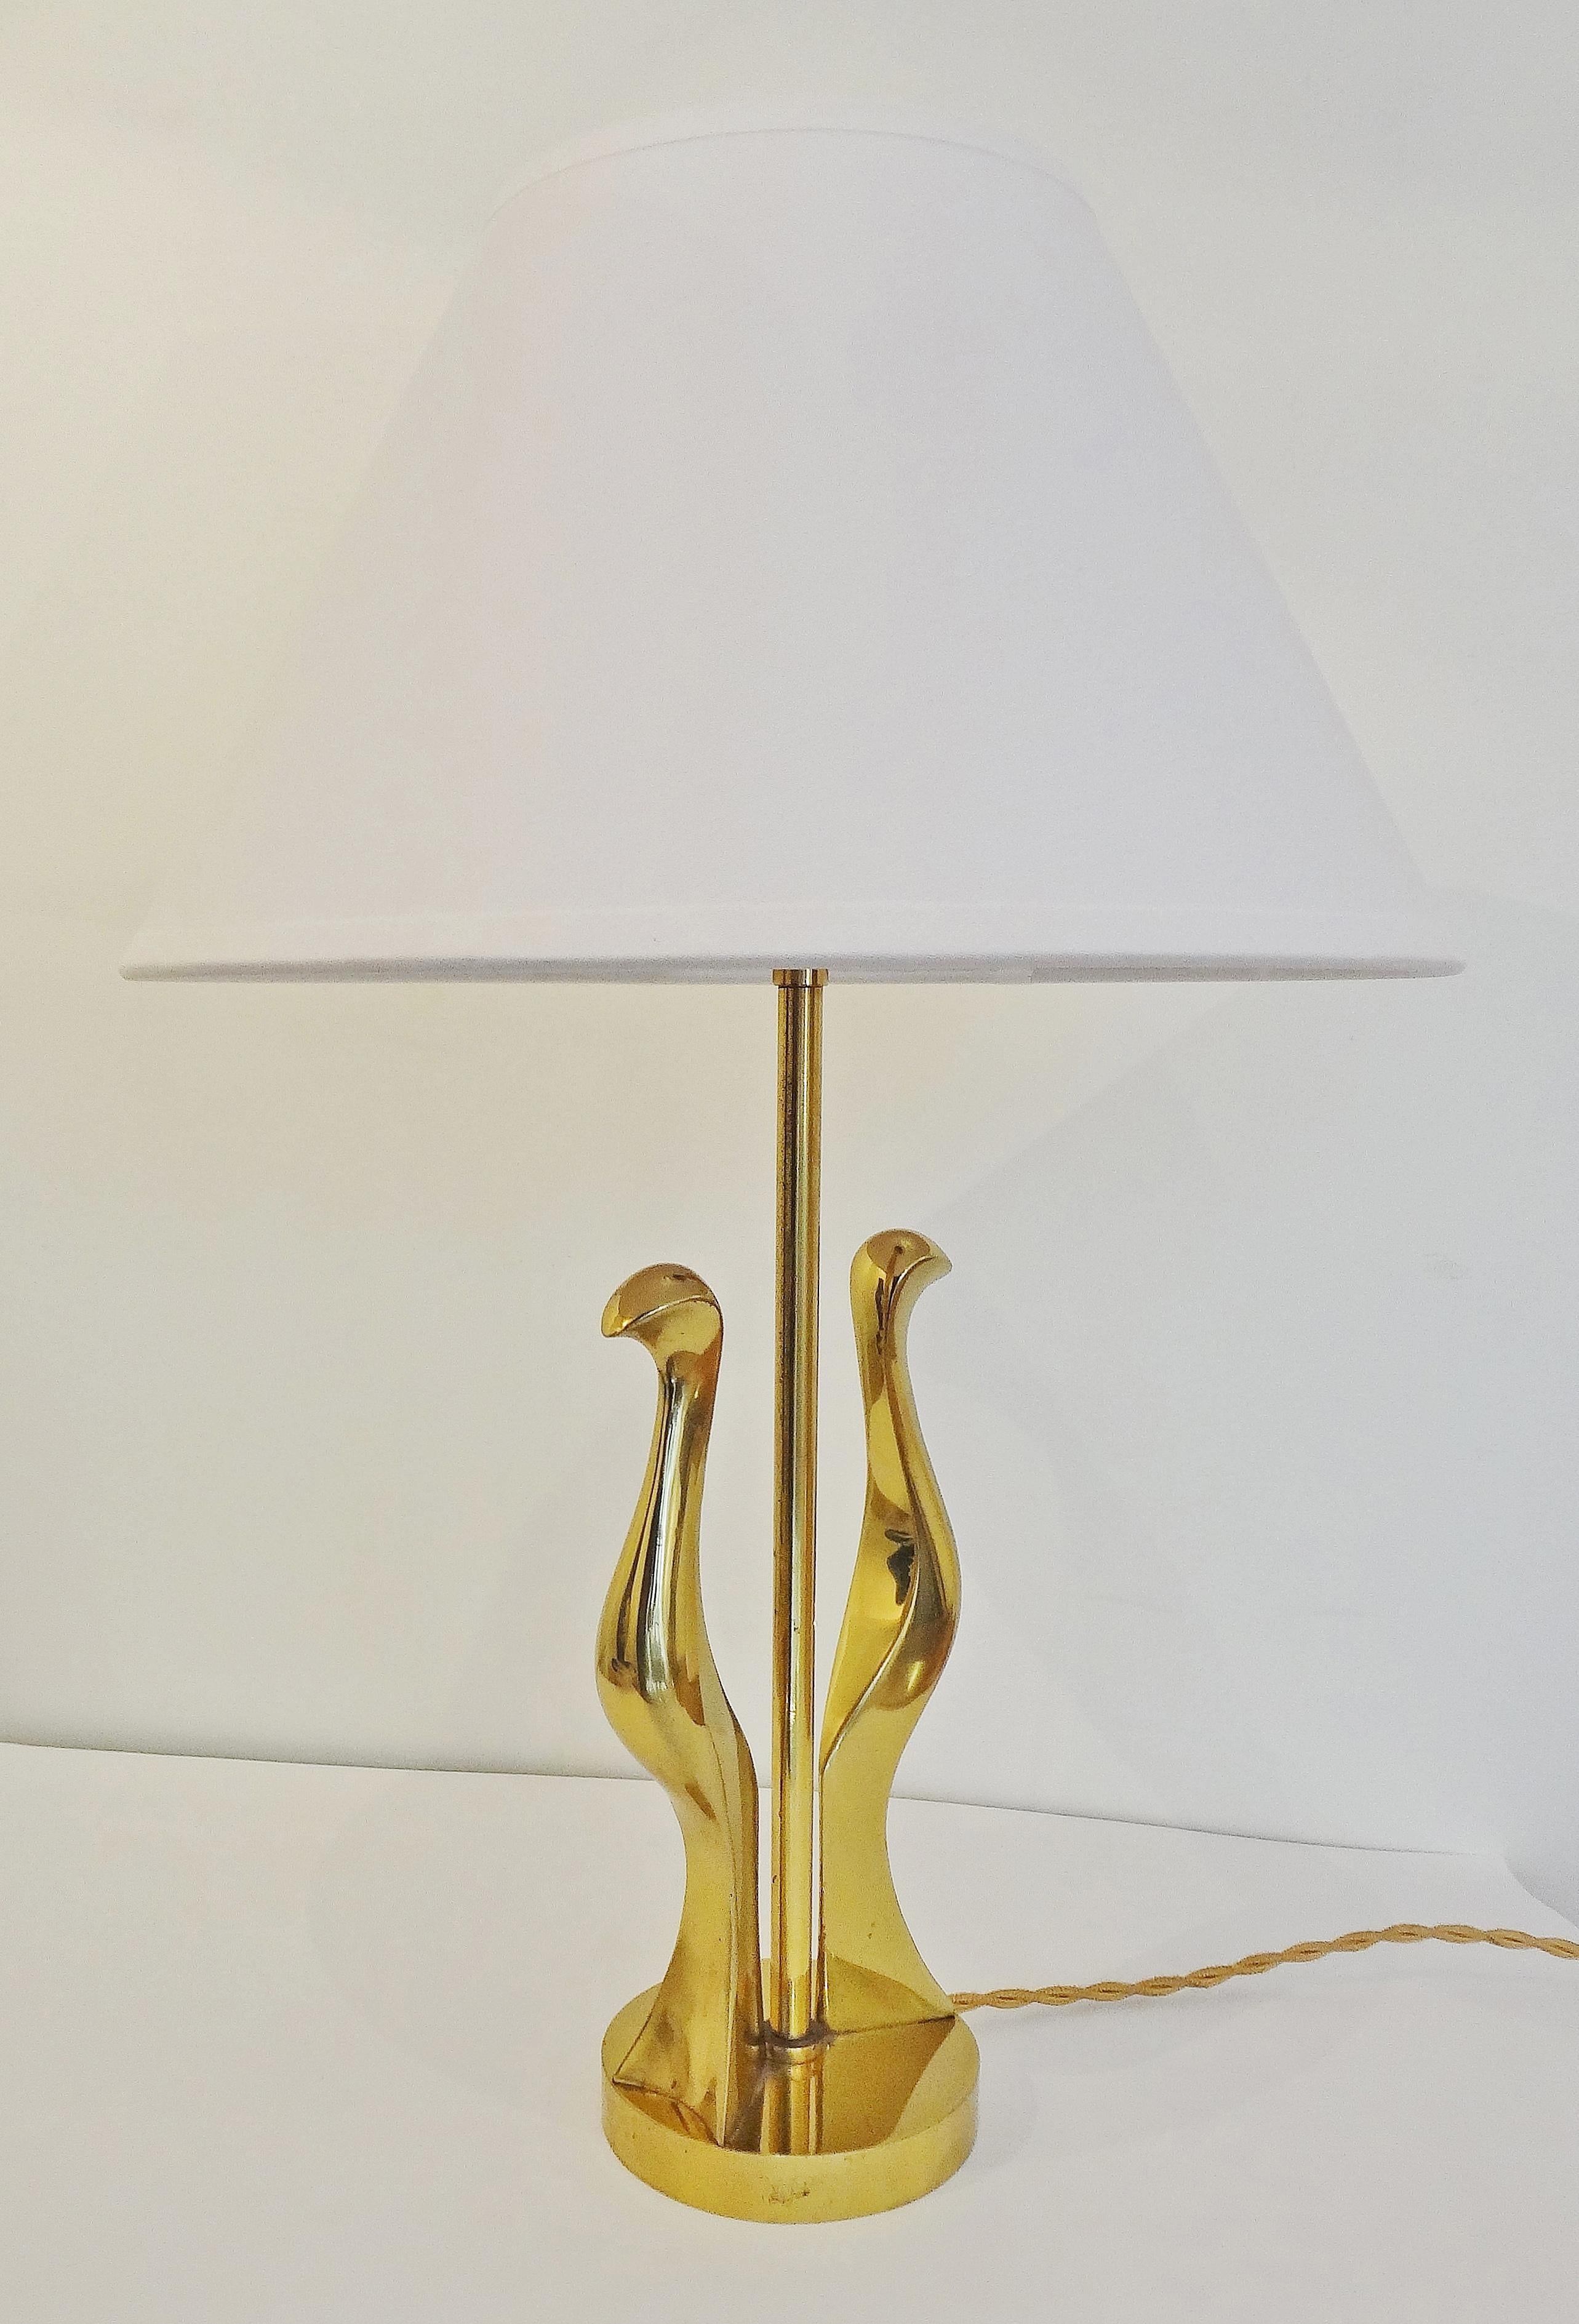 Polished Bronze Table Lamp by Riccardo Scarpa, 1960 For Sale